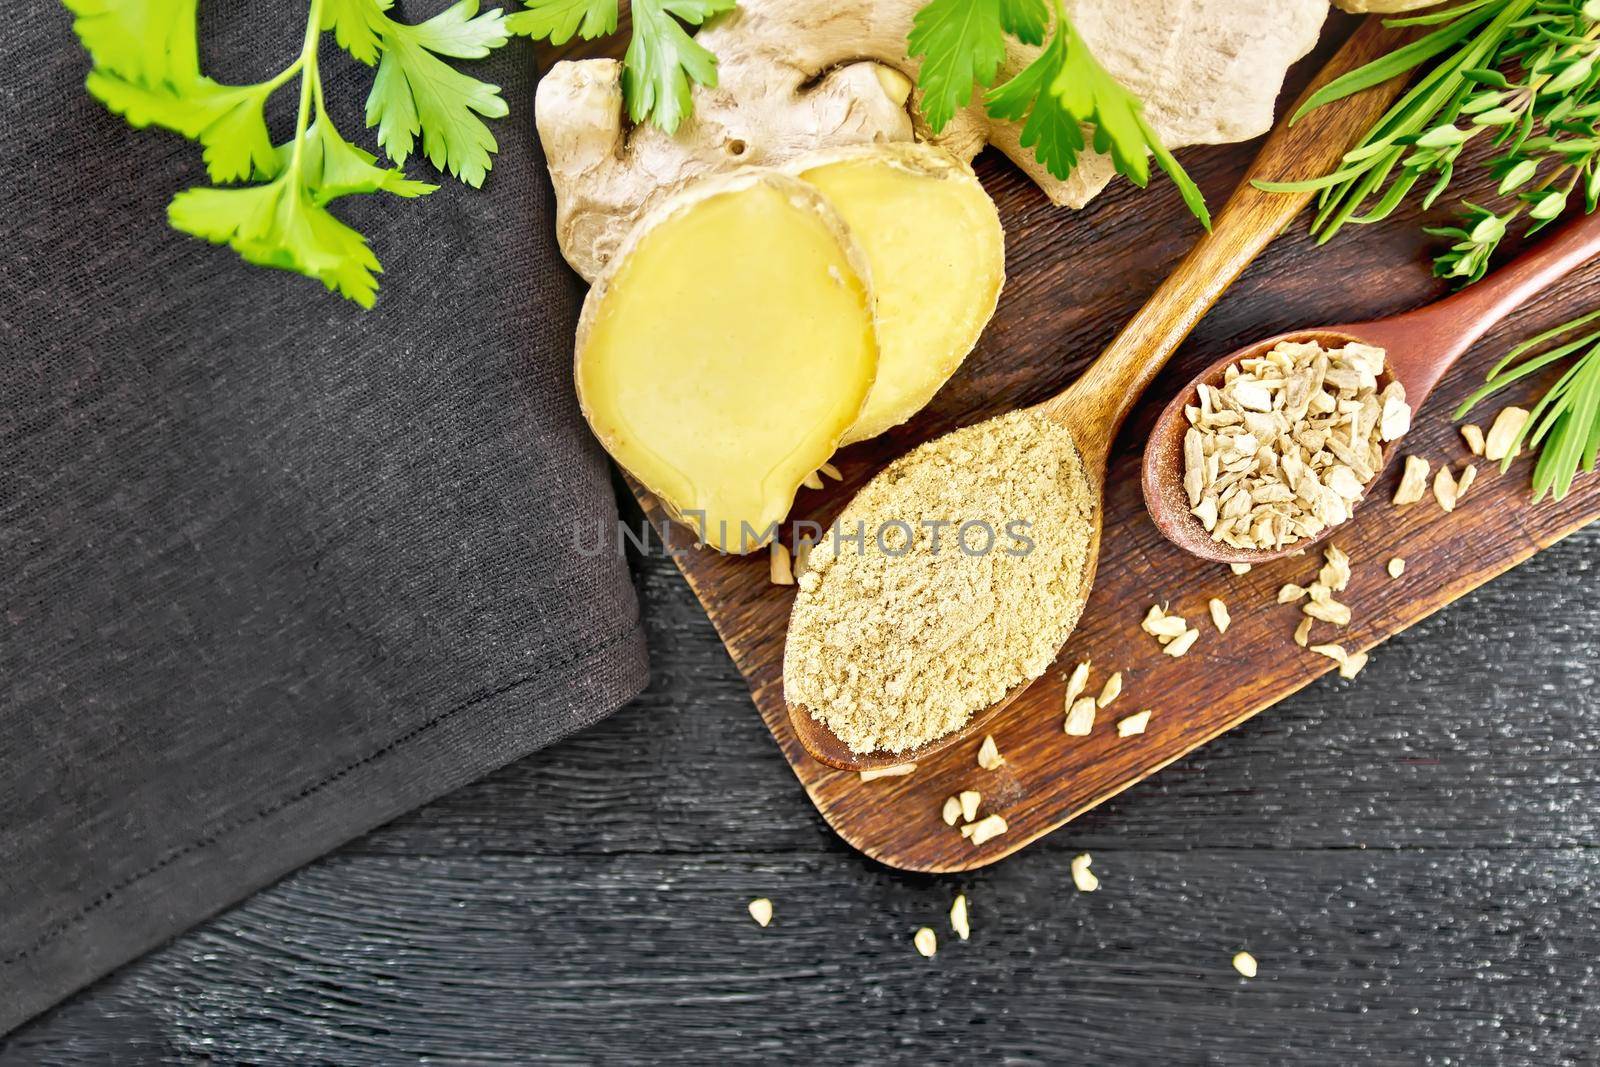 Ground ginger and flakes in two wooden spoons, ginger root, spicy herbs, napkin on a wooden board background from above